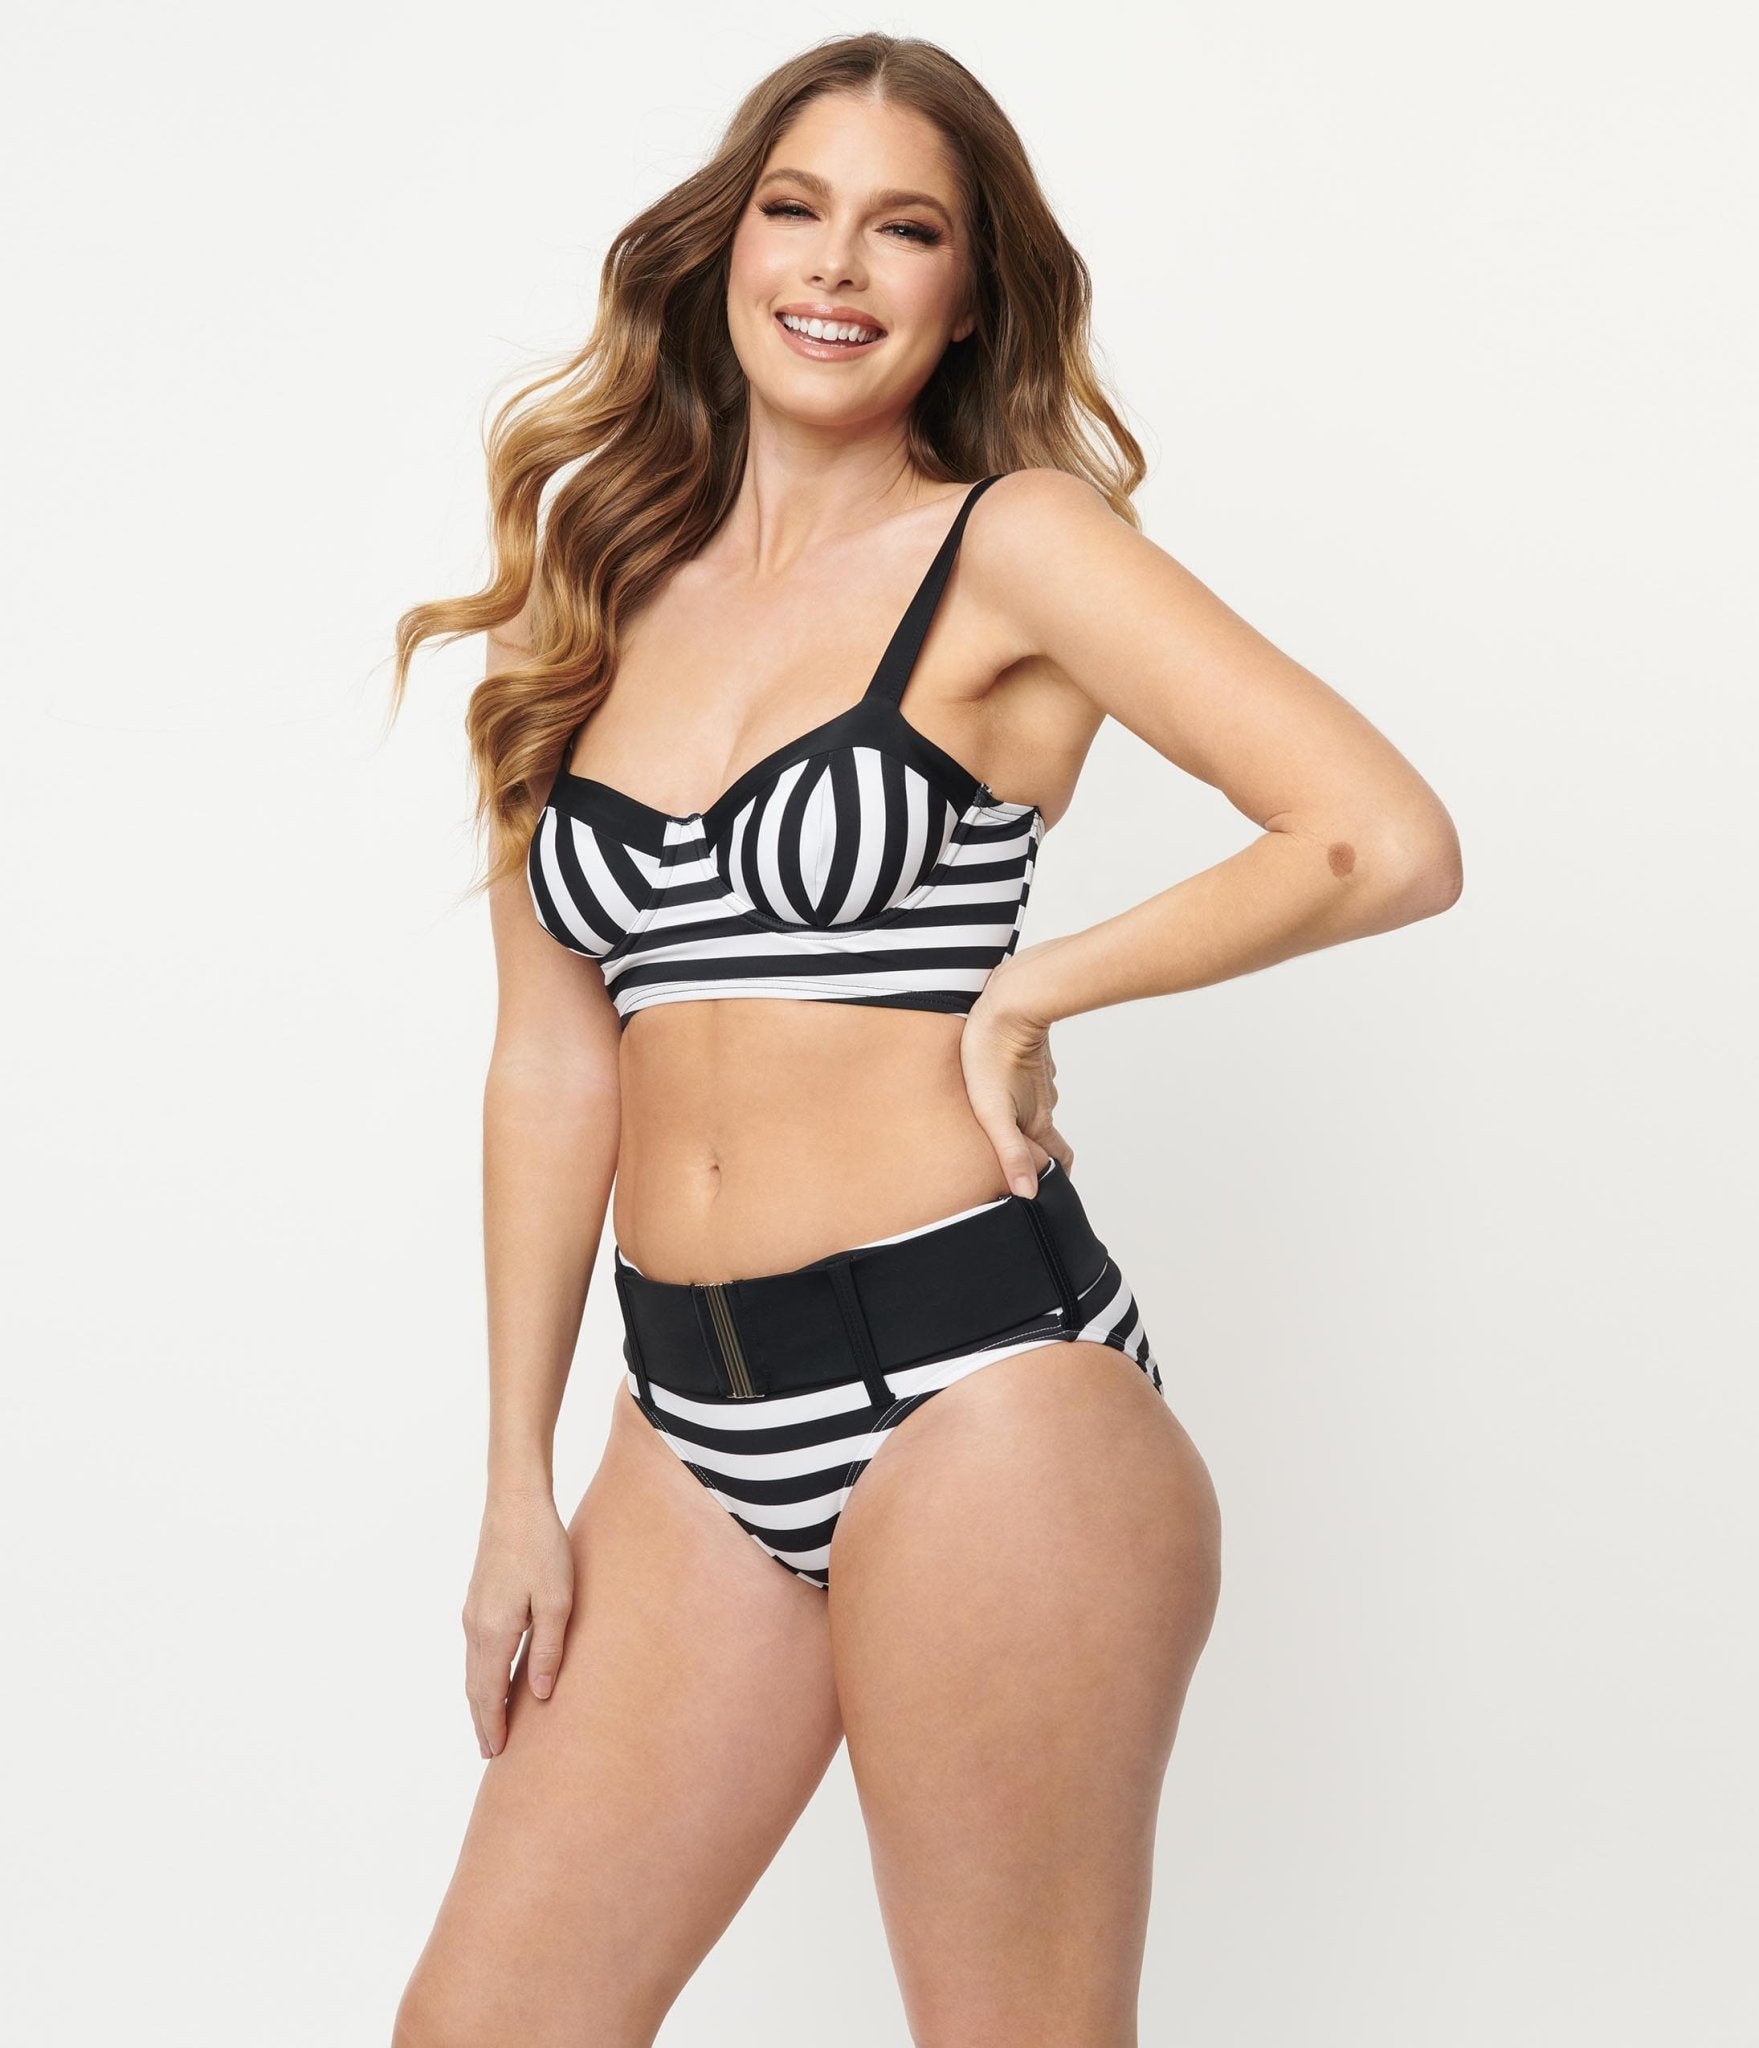 Vintage Black and White Bikinis and Swimsuits – Unique Vintage